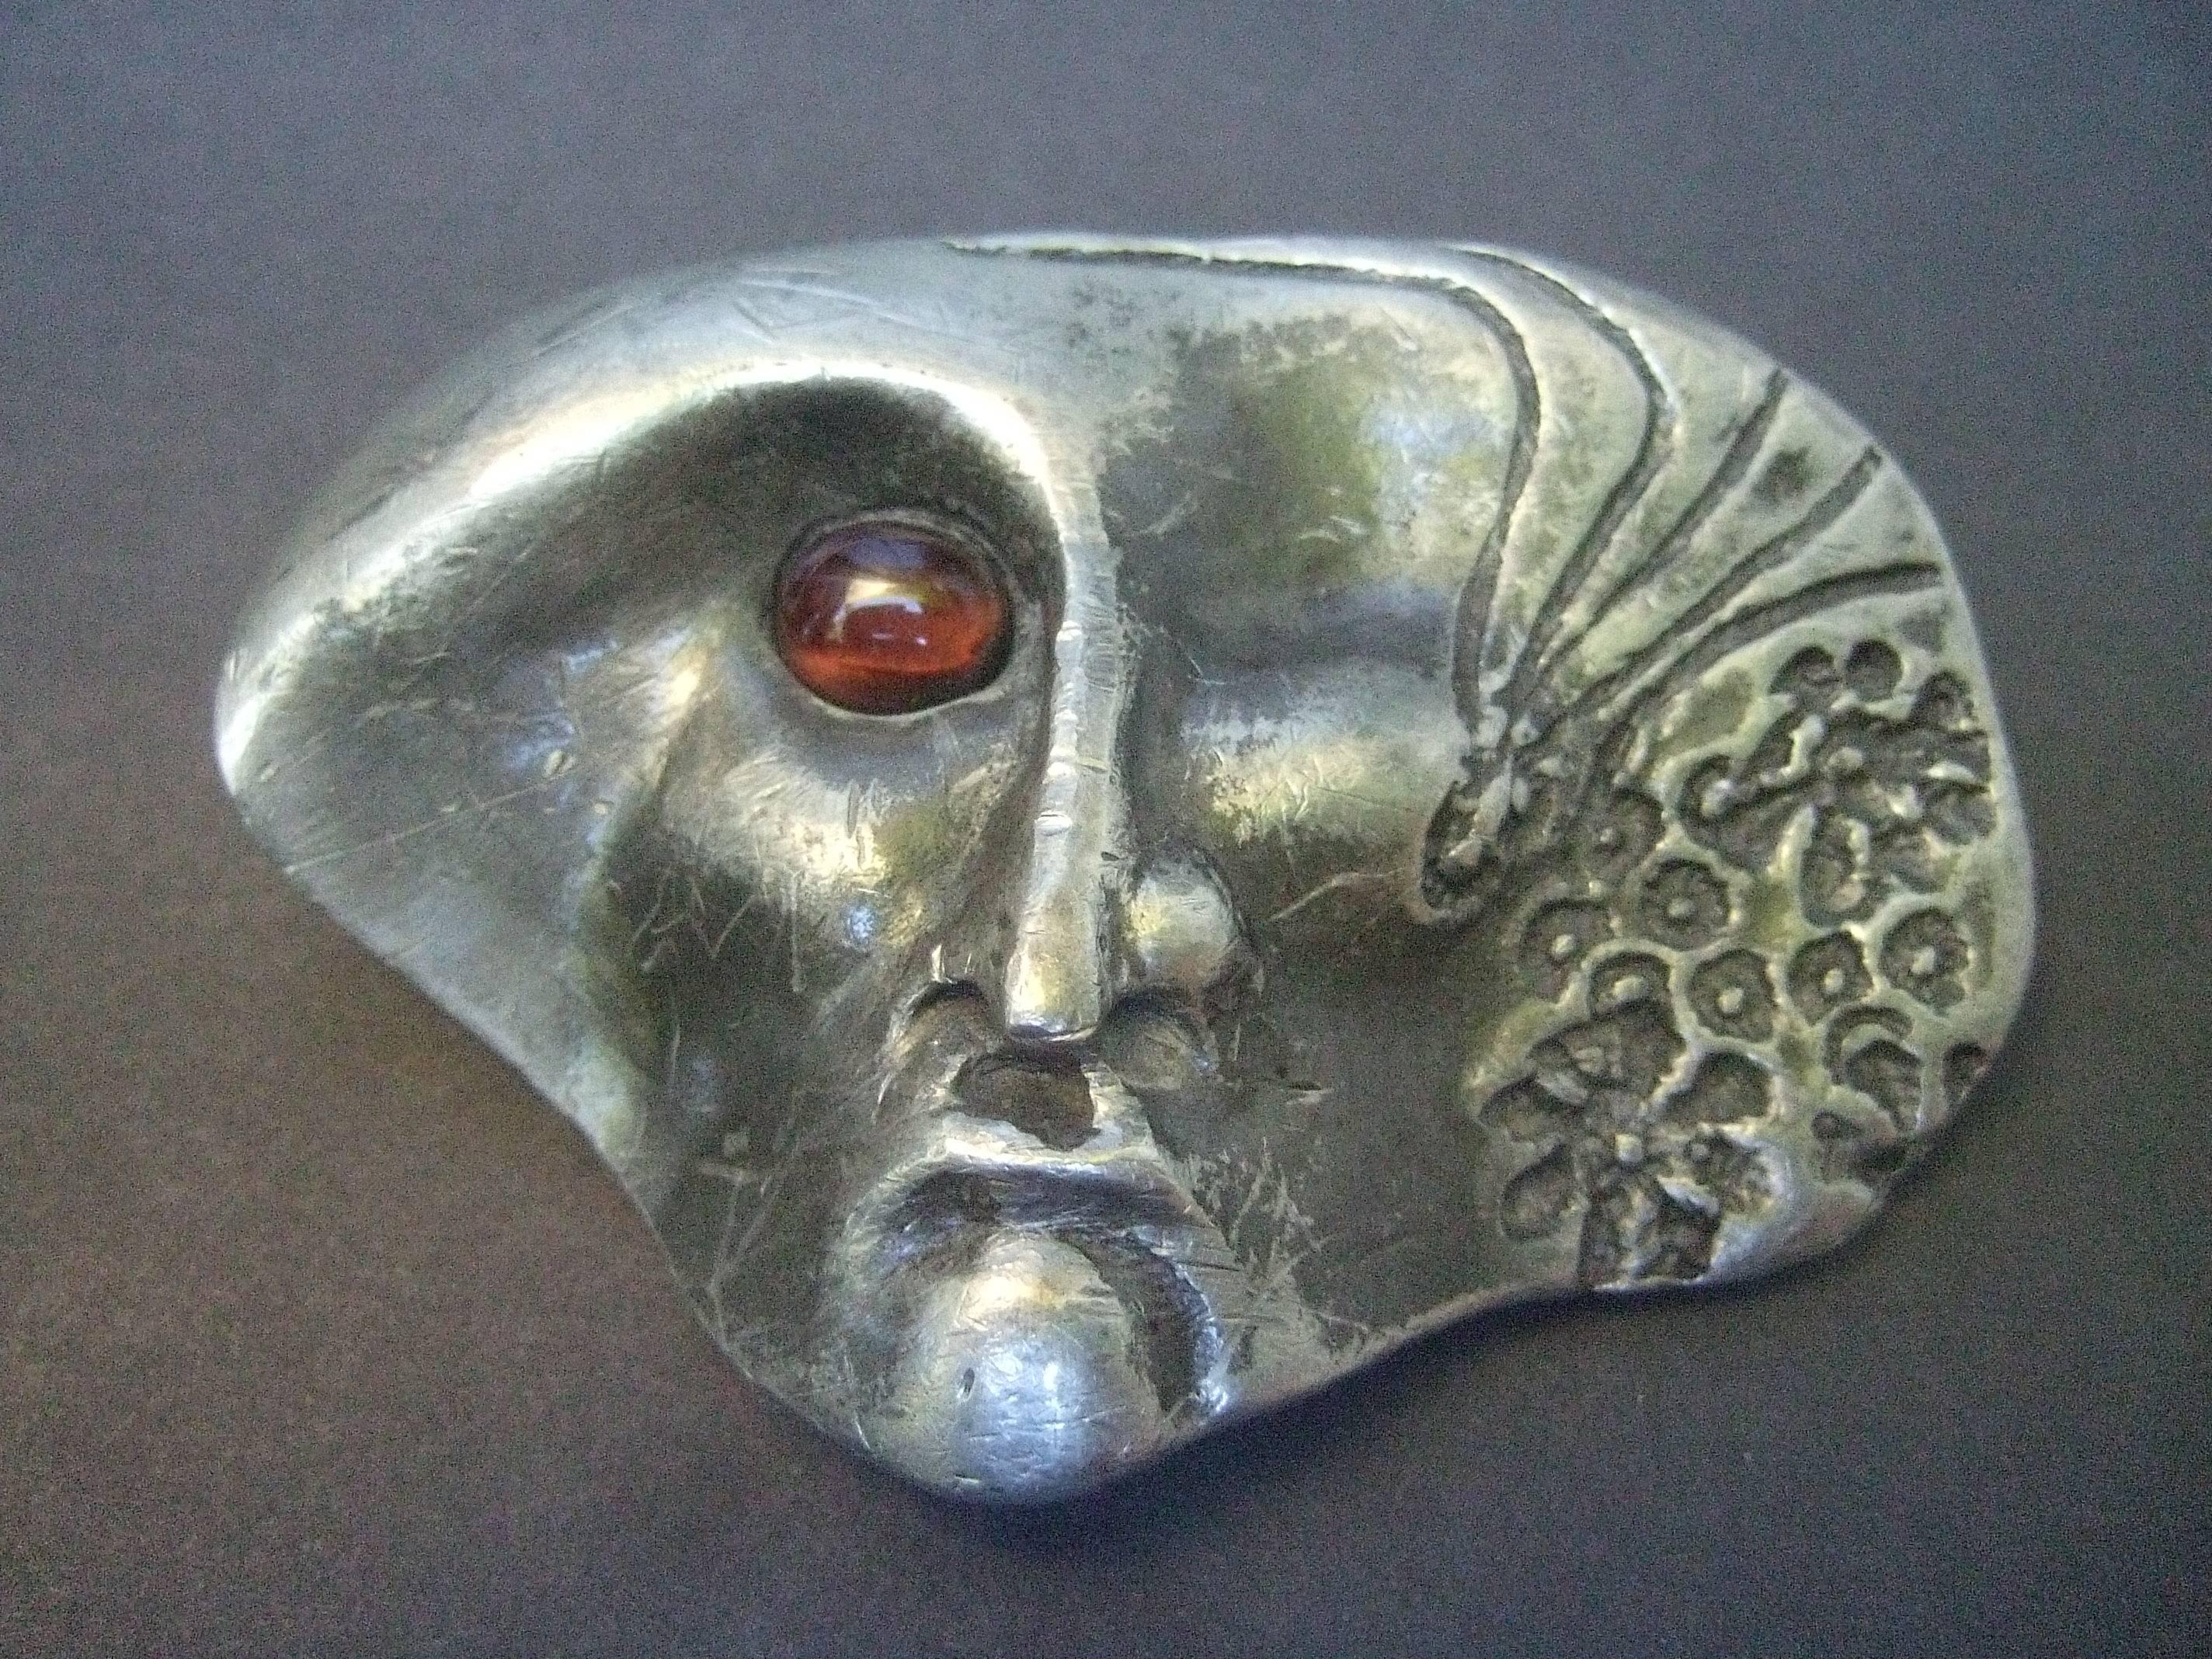 Avant-garde silver metal artisan belt buckle by Lynne Dorsch 
The unique belt buckle is designed with a surrealistic 
face. The face is adorned with a smooth glass cabochon
that distinguishes one eye 

One side of the figures face is